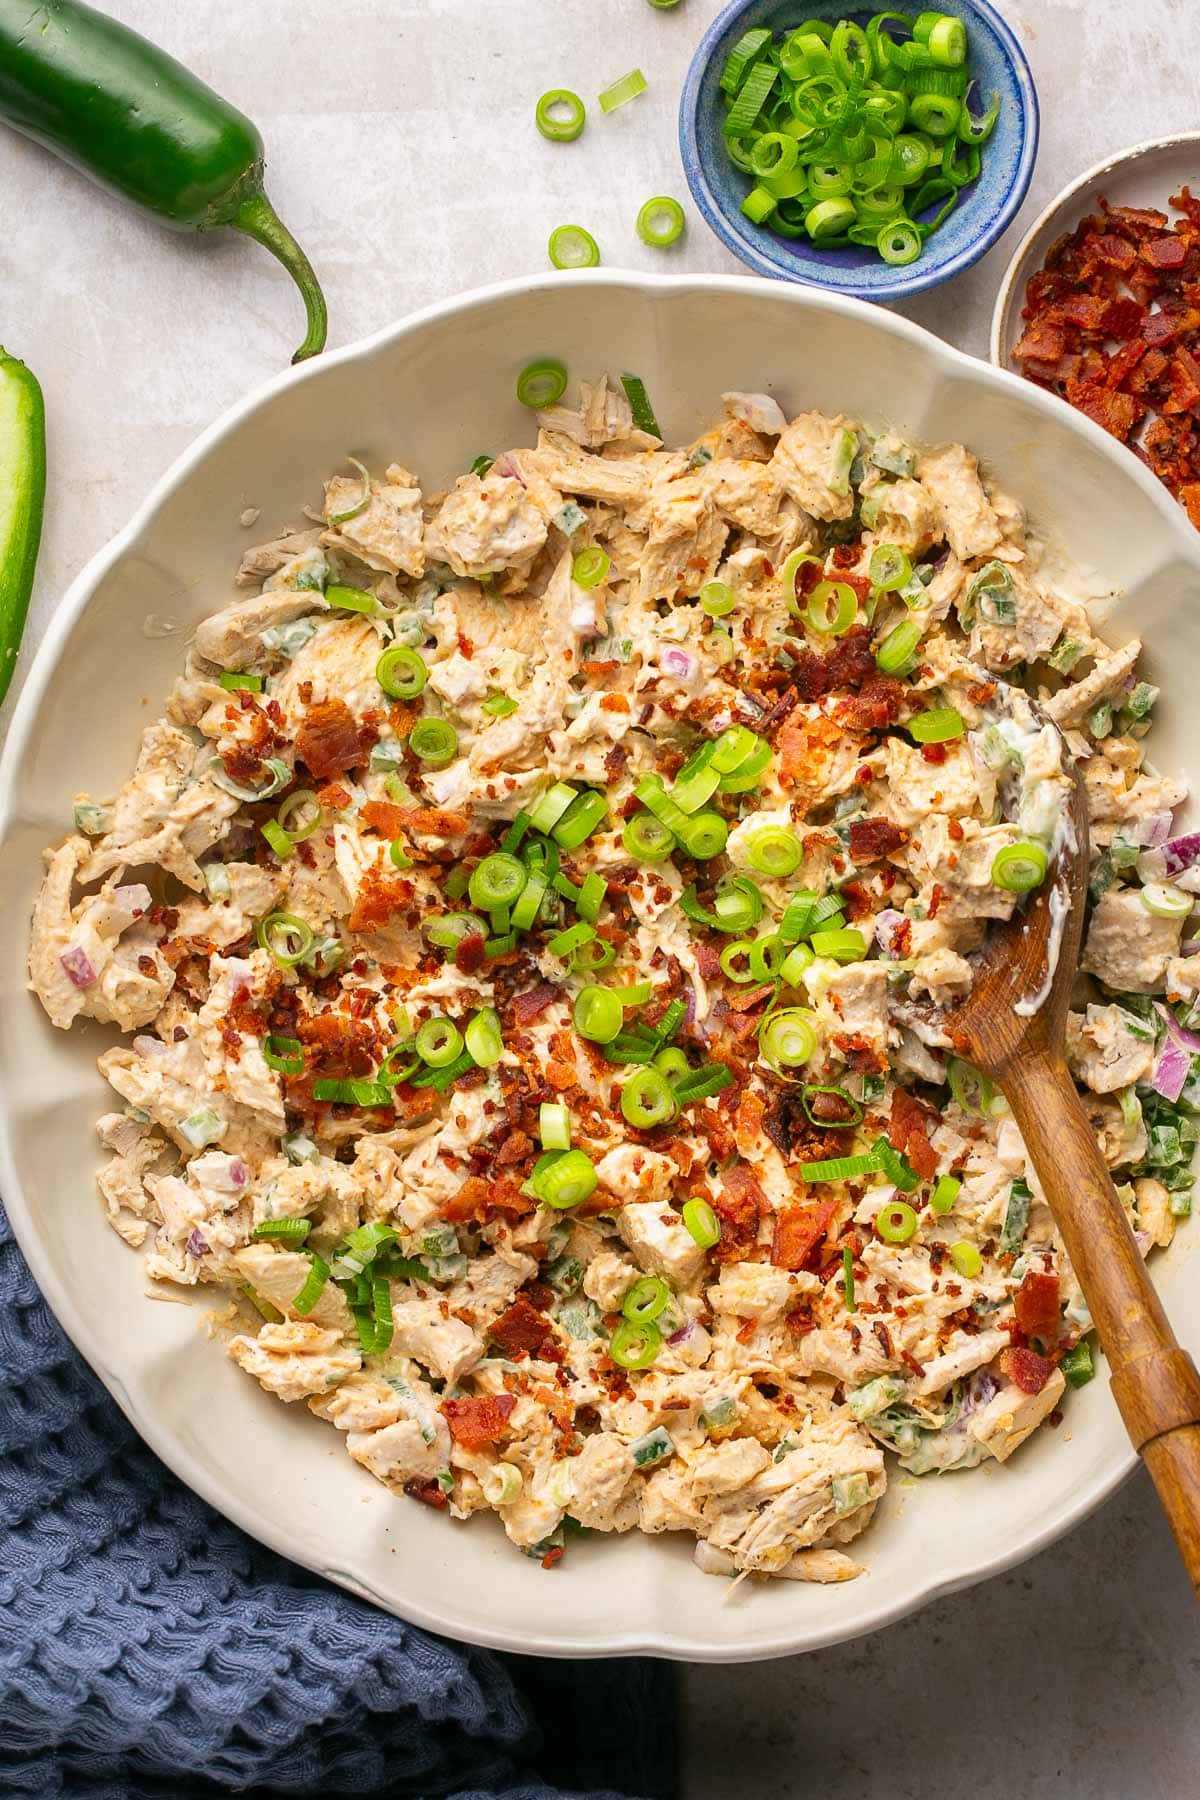 A close up photo of the Jalapeno Popper Chicken Salad topped with crumbled bacon and green onions